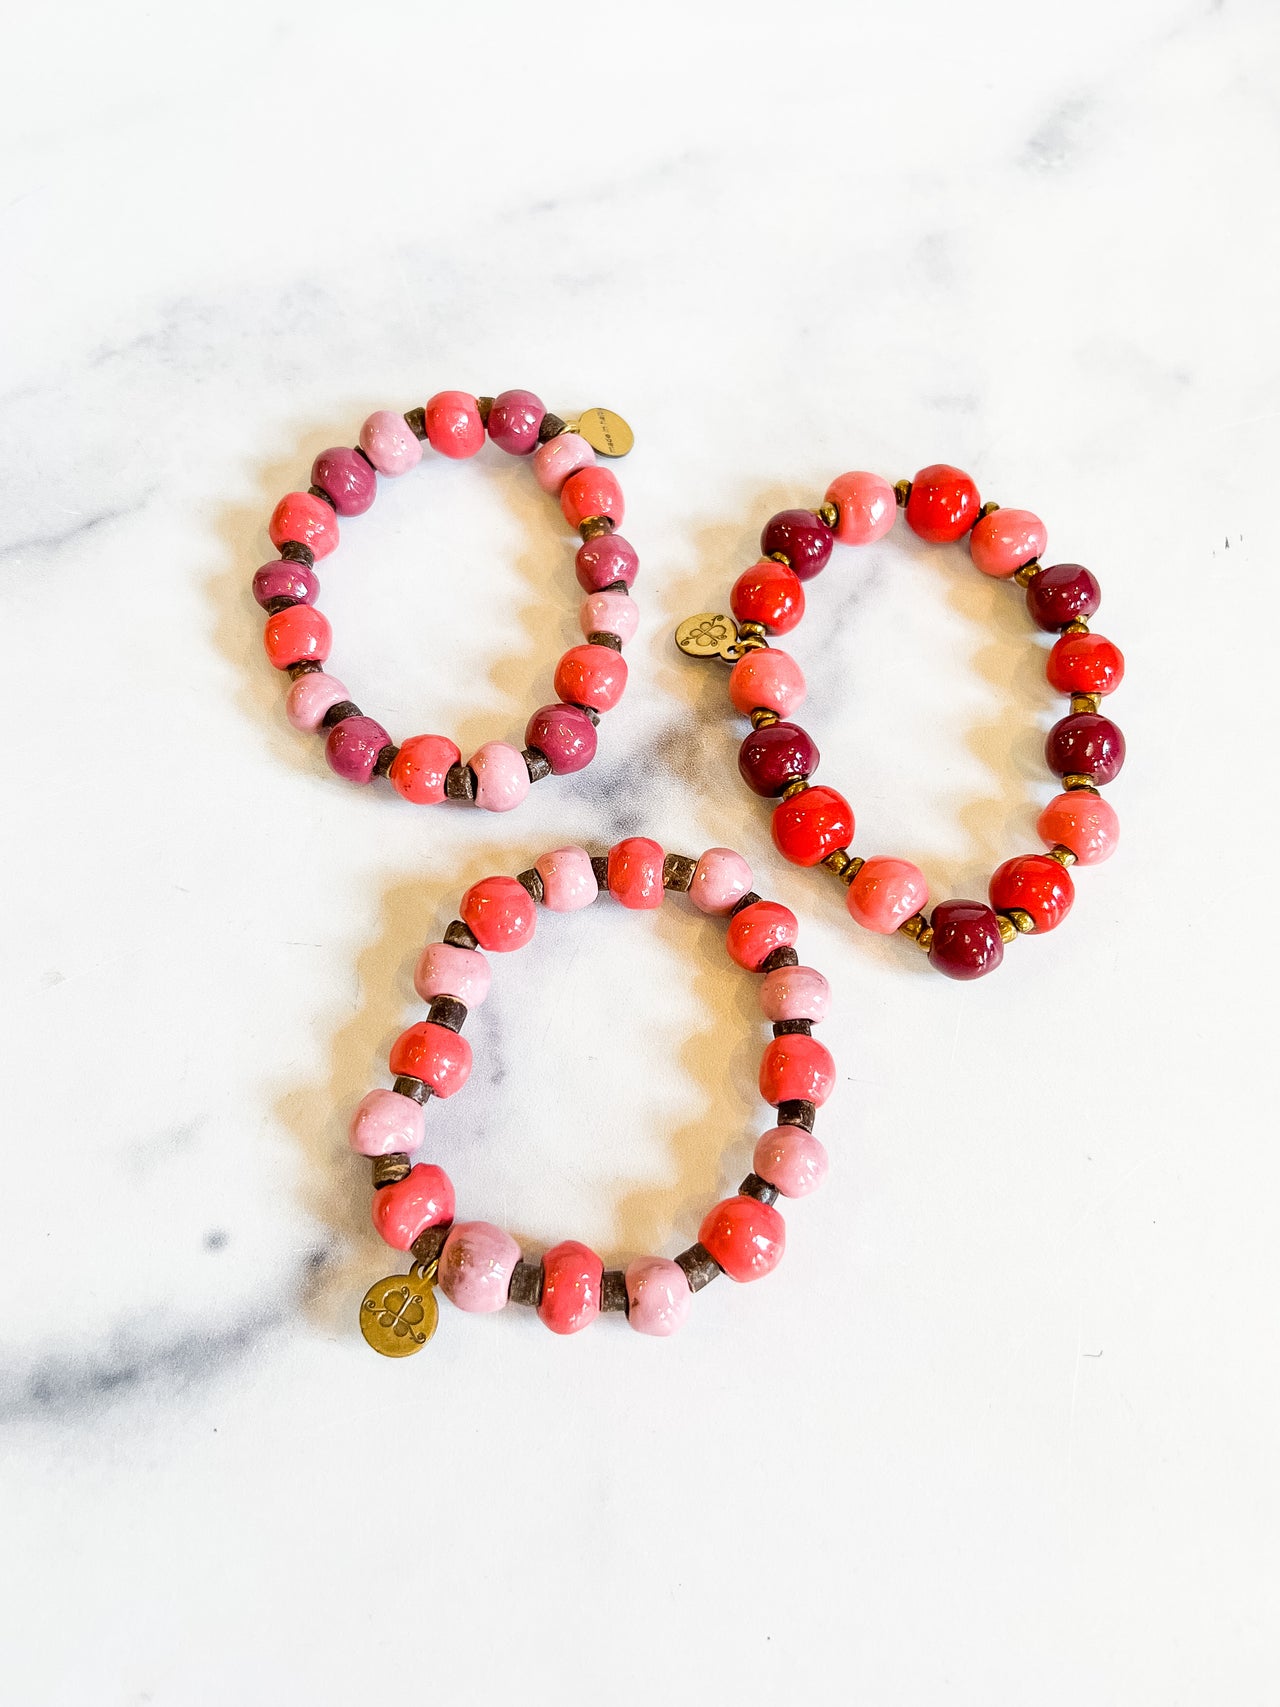 Handcrafted Stackable Set Clay Bead Bracelets from Haitian